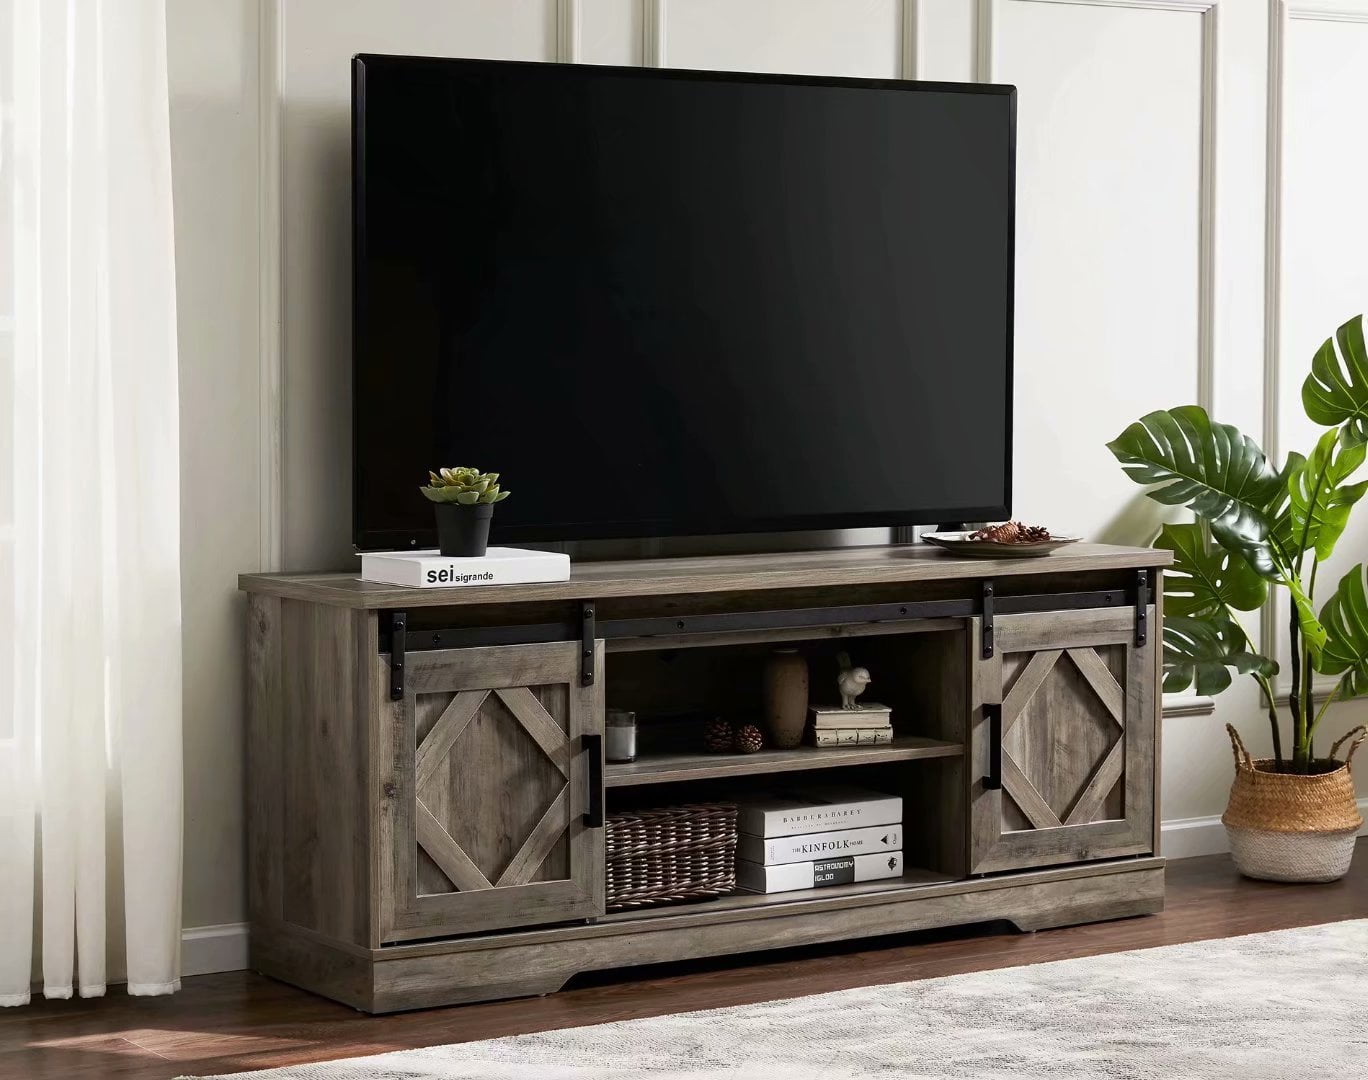 WAMPAT Farmhouse TV Stand for TV up to 65" Barn Door Media ...